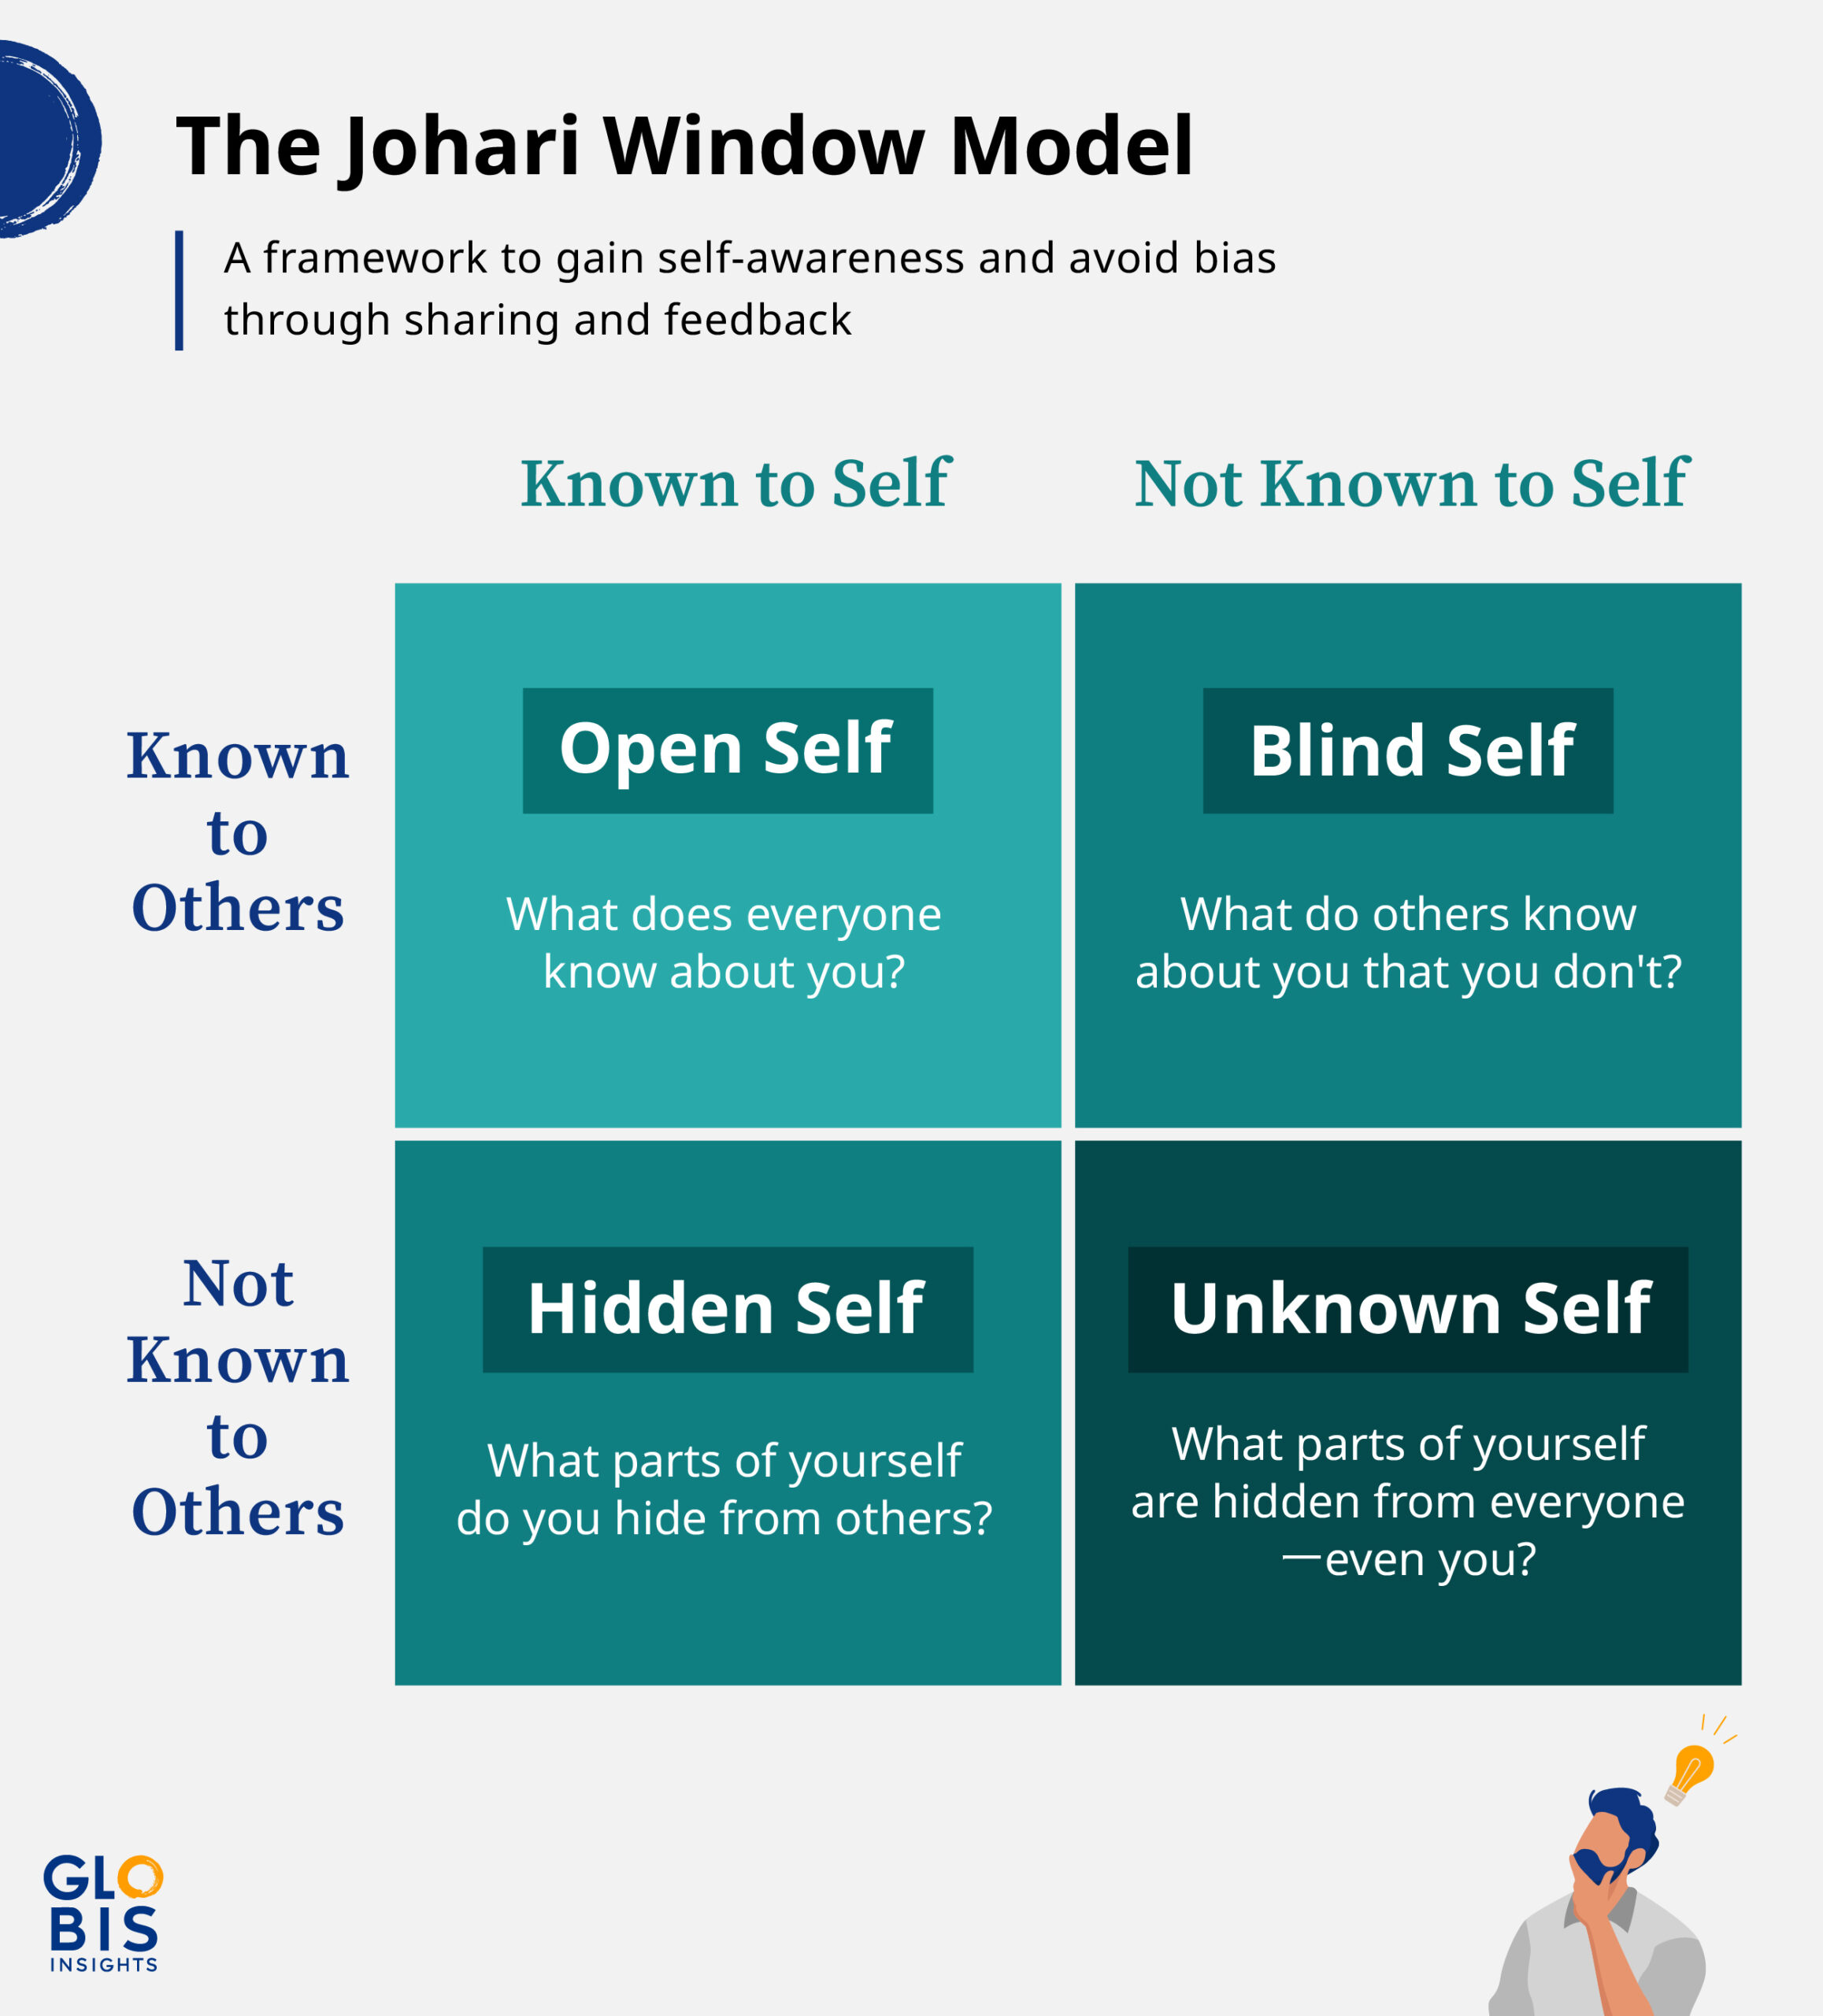 Infographic explaining the Johari Window Model, a framework for reflection, sharing, and feedback for better understanding of the self